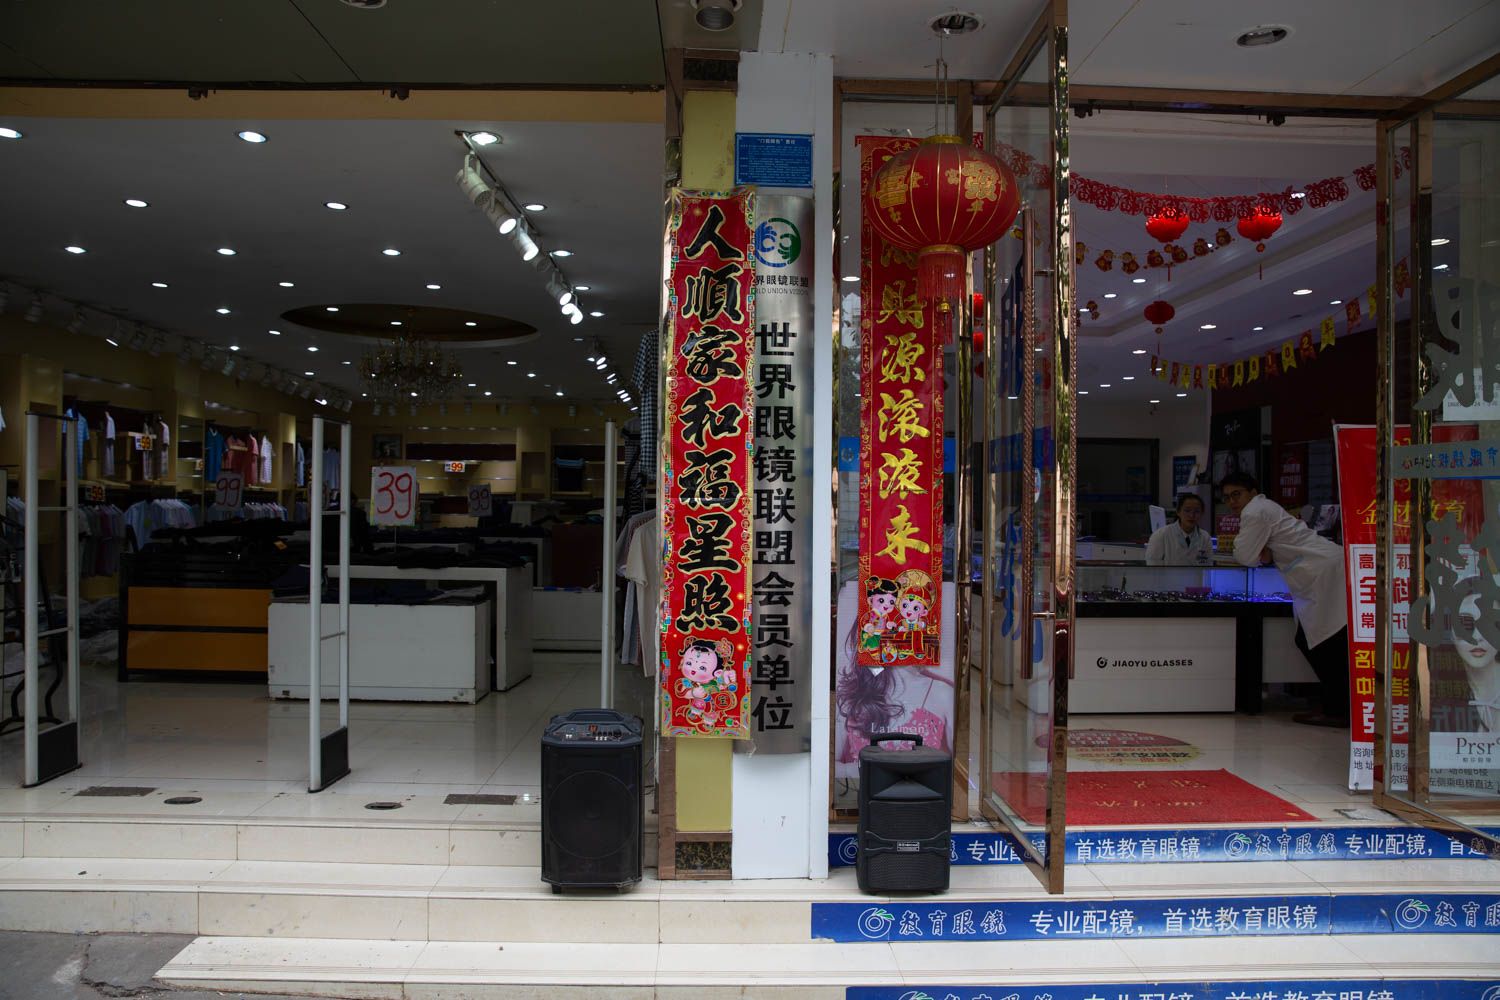 To attract customers, shop owners play loud music outside of their stores